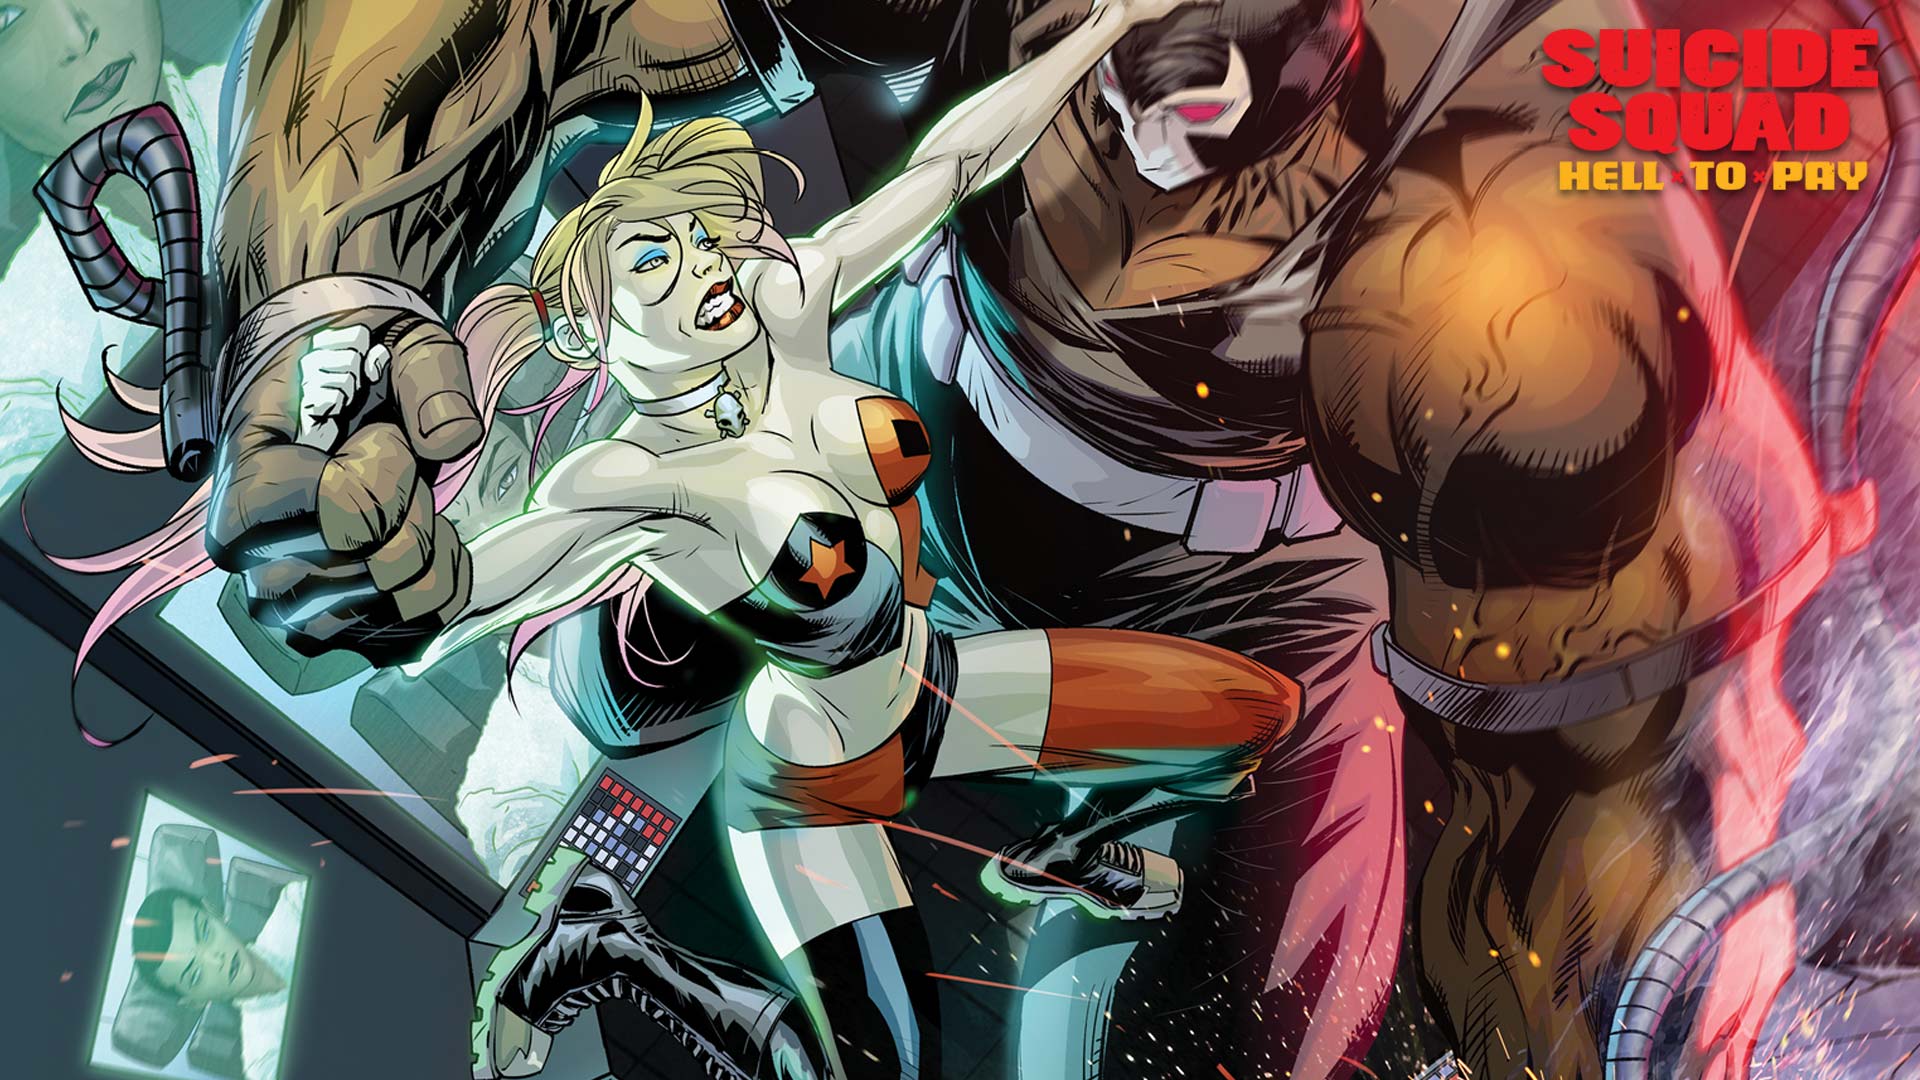 THERE IS HELL TO PAY IN THIS NEW SUICIDE SQUAD COMIC SERIES